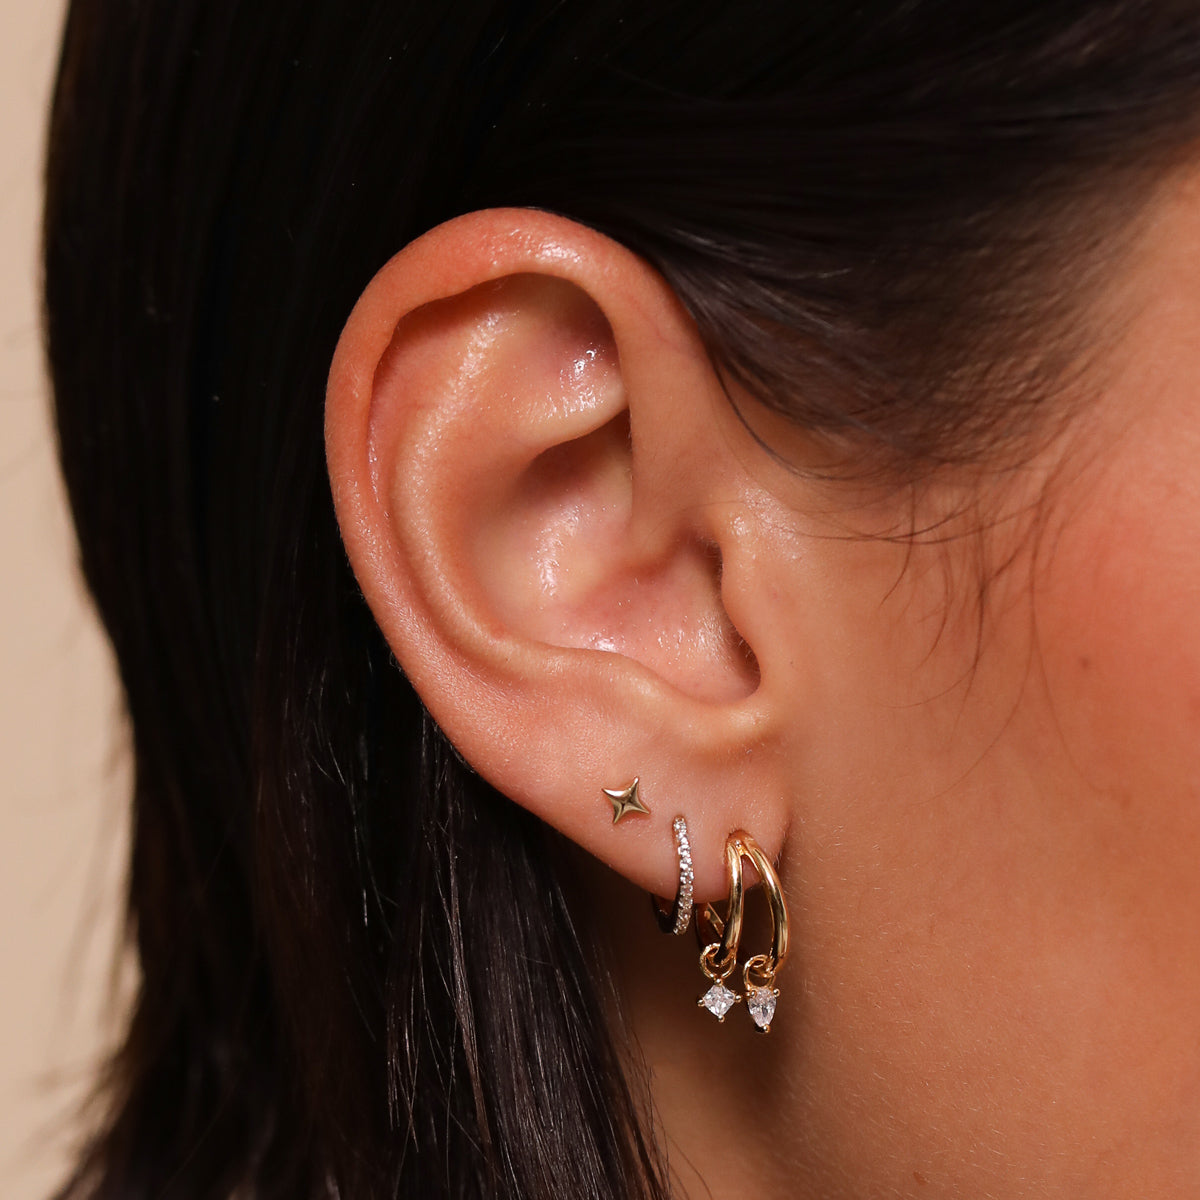 Celestial Crystal Huggies in Gold worn with other earrings